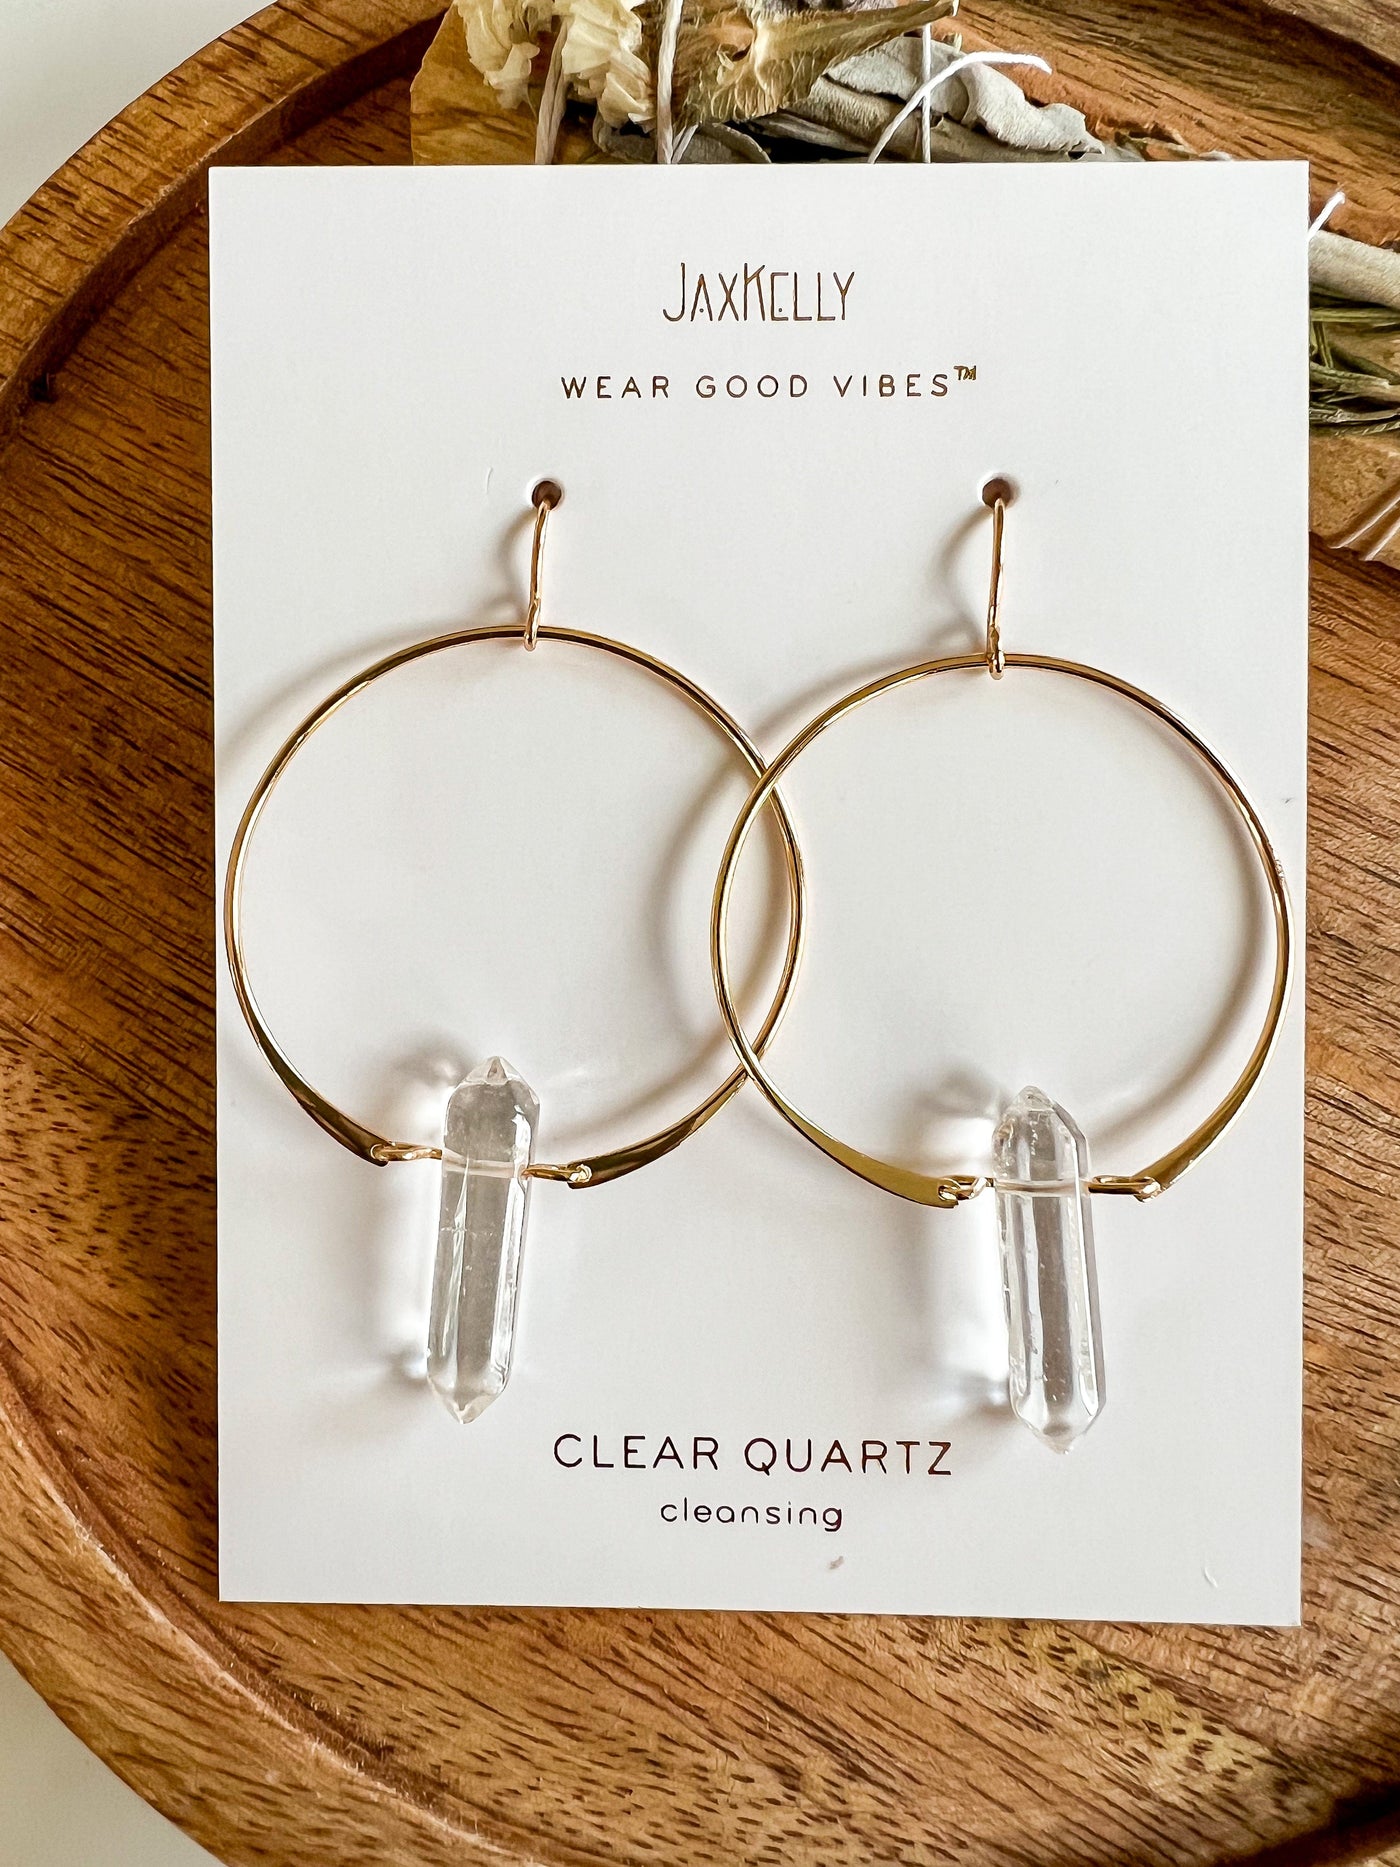 HOOP EARRINGS 18K - CLEAR QUARTZ Revive In Style Vintage Furniture Painted Refinished Redesign Beautiful One of a Kind Artistic Antique Unique Home Decor Interior Design French Country Shabby Chic Cottage Farmhouse Grandmillenial Coastal Chalk Paint Metallic Glam Eclectic Quality Dovetailed Rustic Furniture Painter Pinterest Bedroom Living Room Entryway Kitchen Home Trends House Styles Decorating ideas